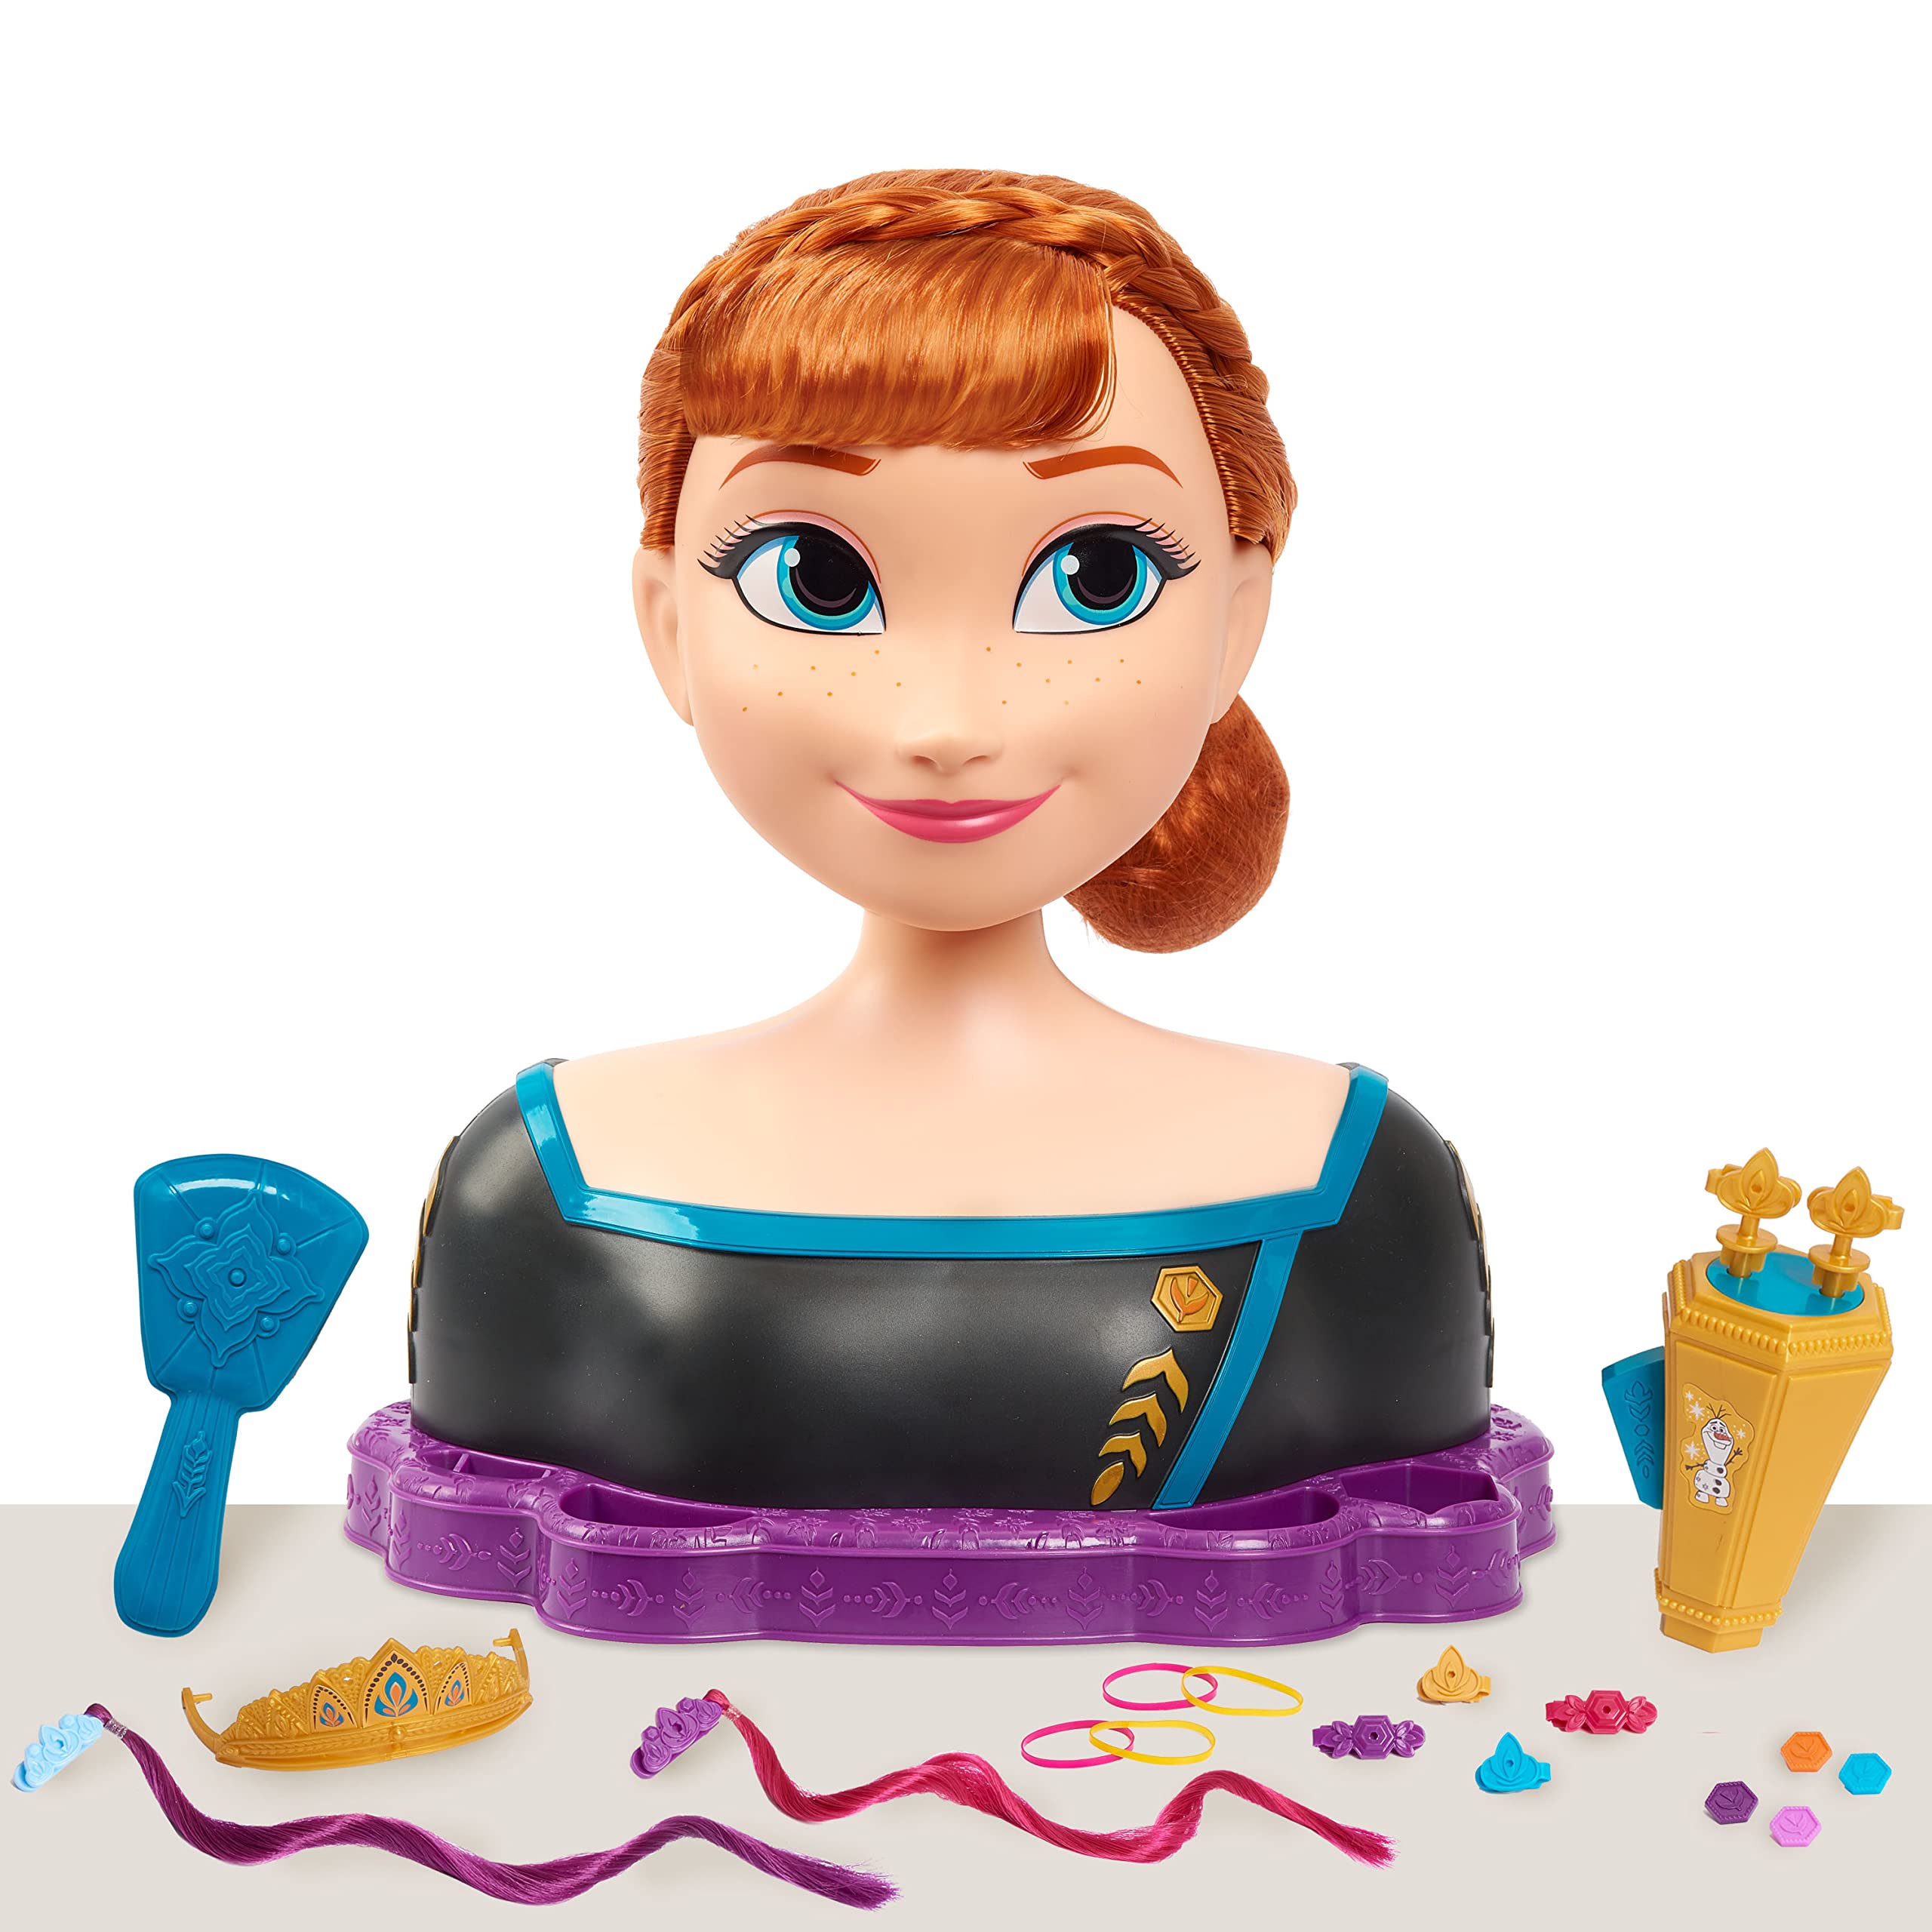 Disney’s Frozen 2 Queen Anna Deluxe Styling Head, 18-pieces, by Just Play, Multi-color